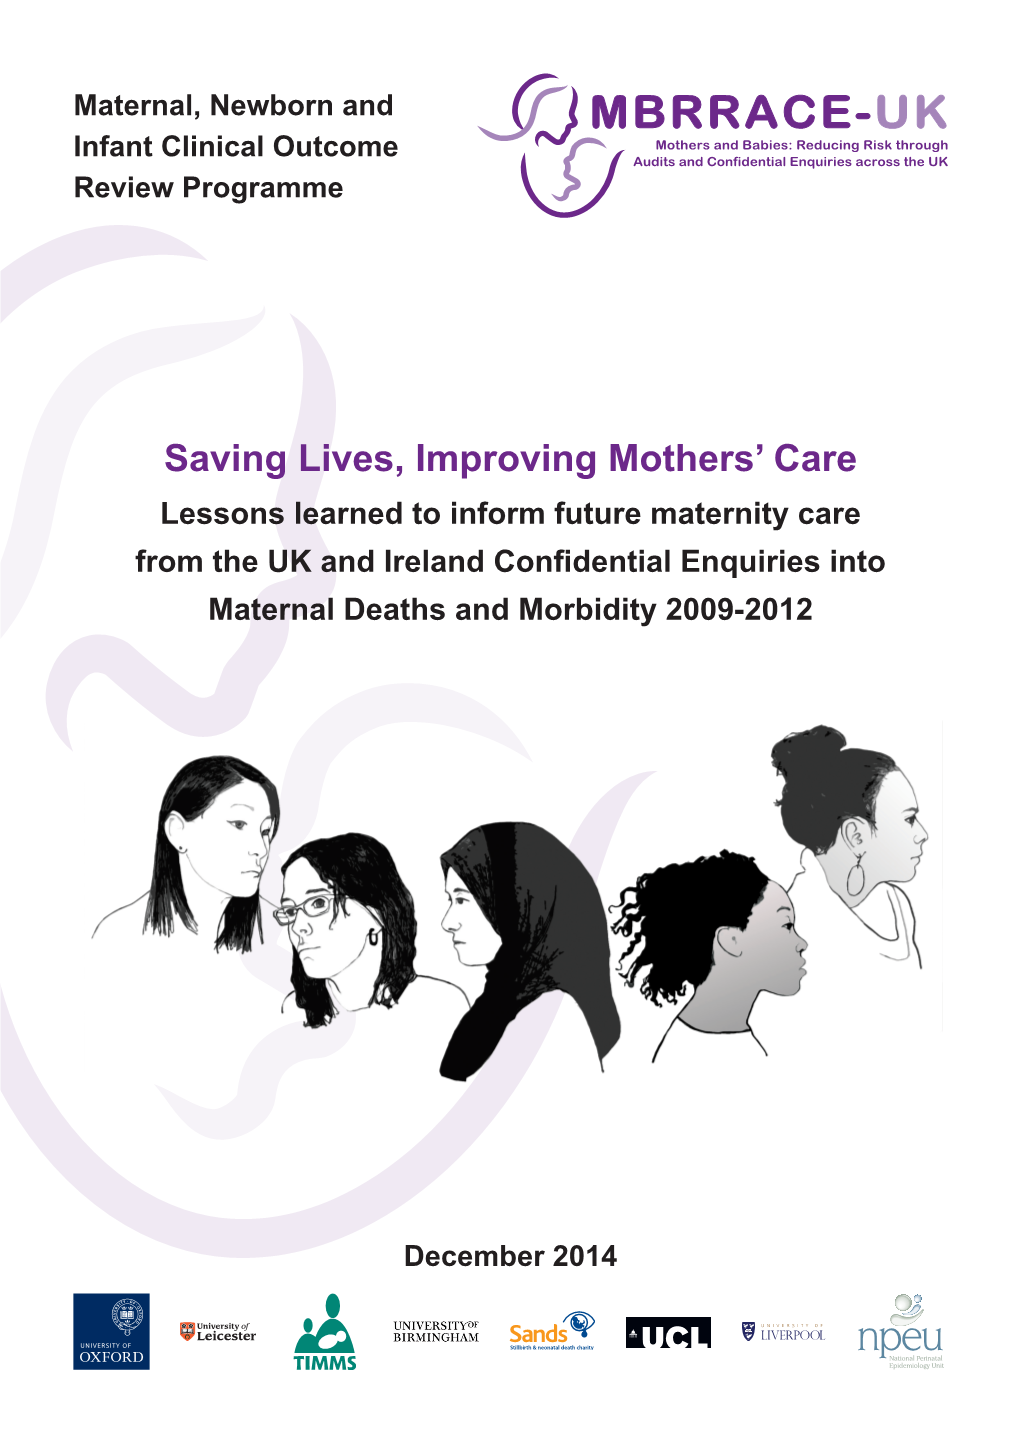 Saving Lives, Improving Mothers' Care 2014